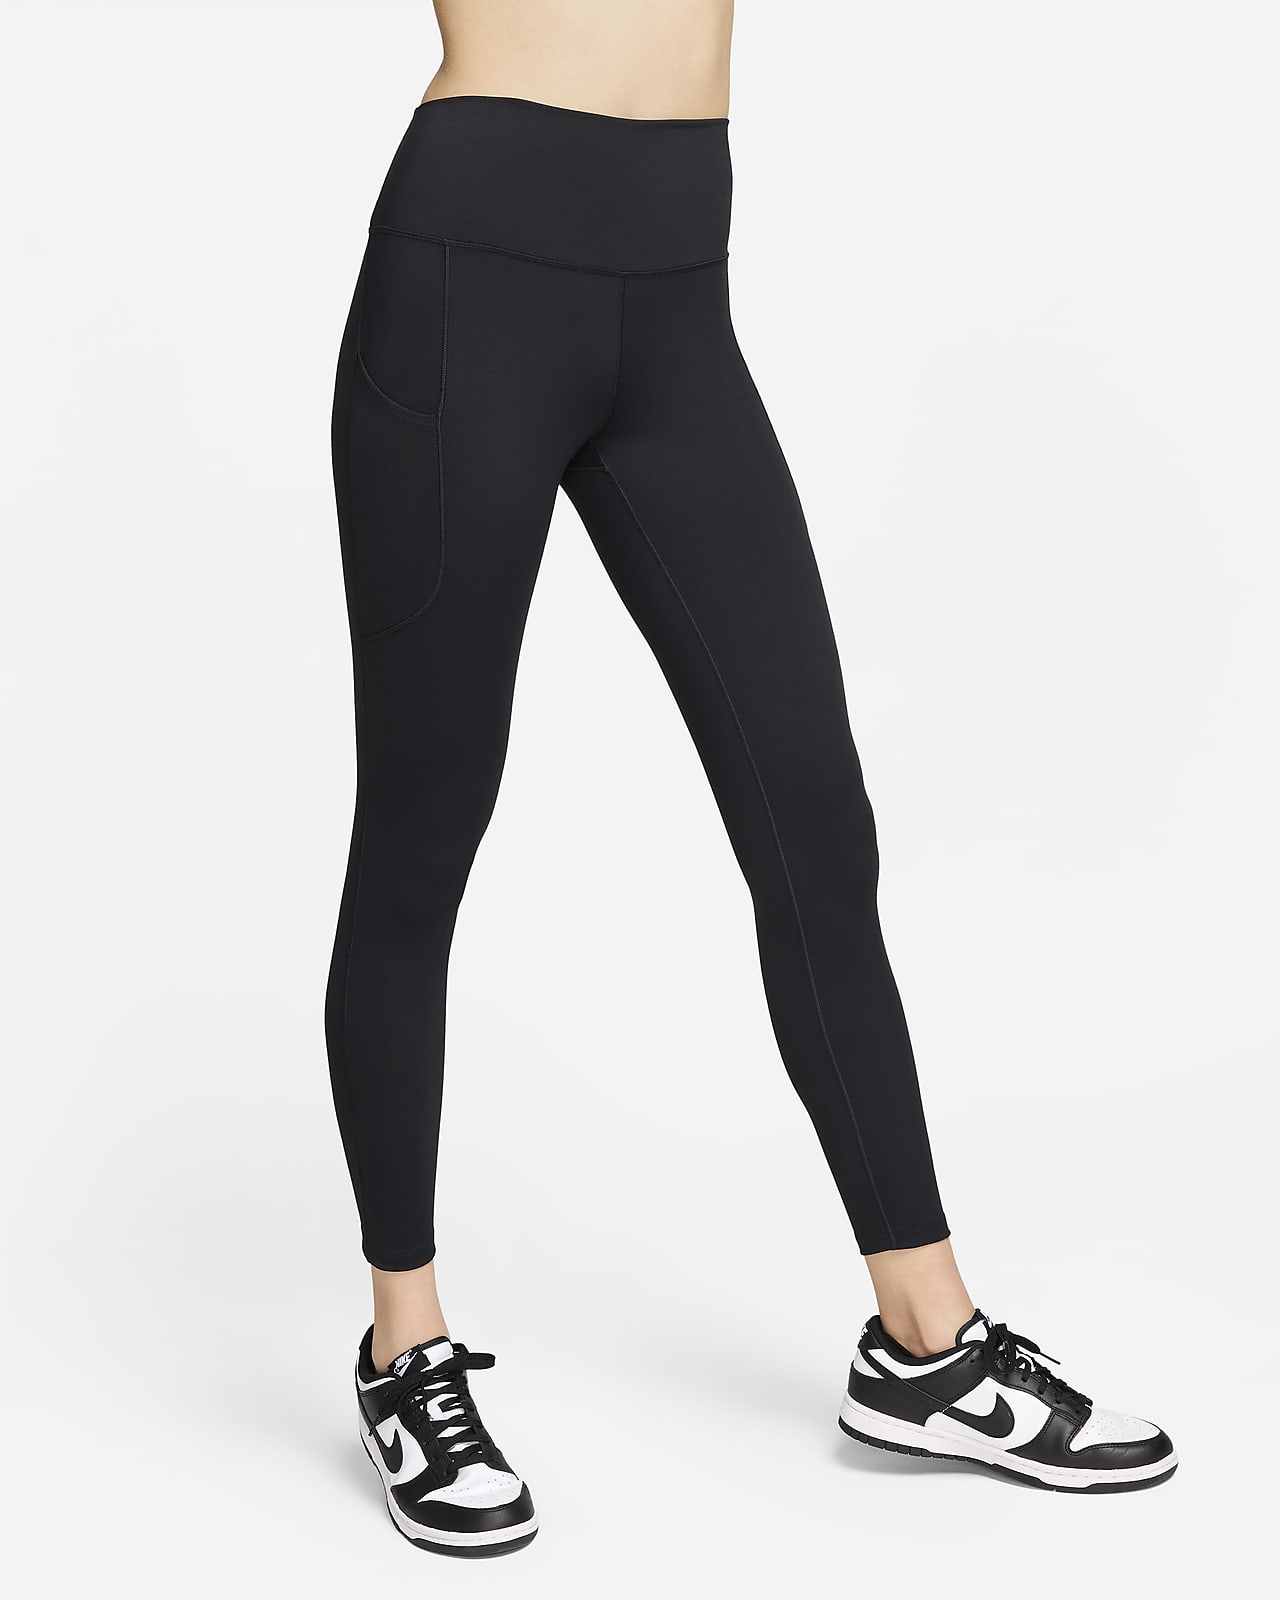 Nike One Mid Rise 7/8 Tights Entrenamiento Mujer - Black/White